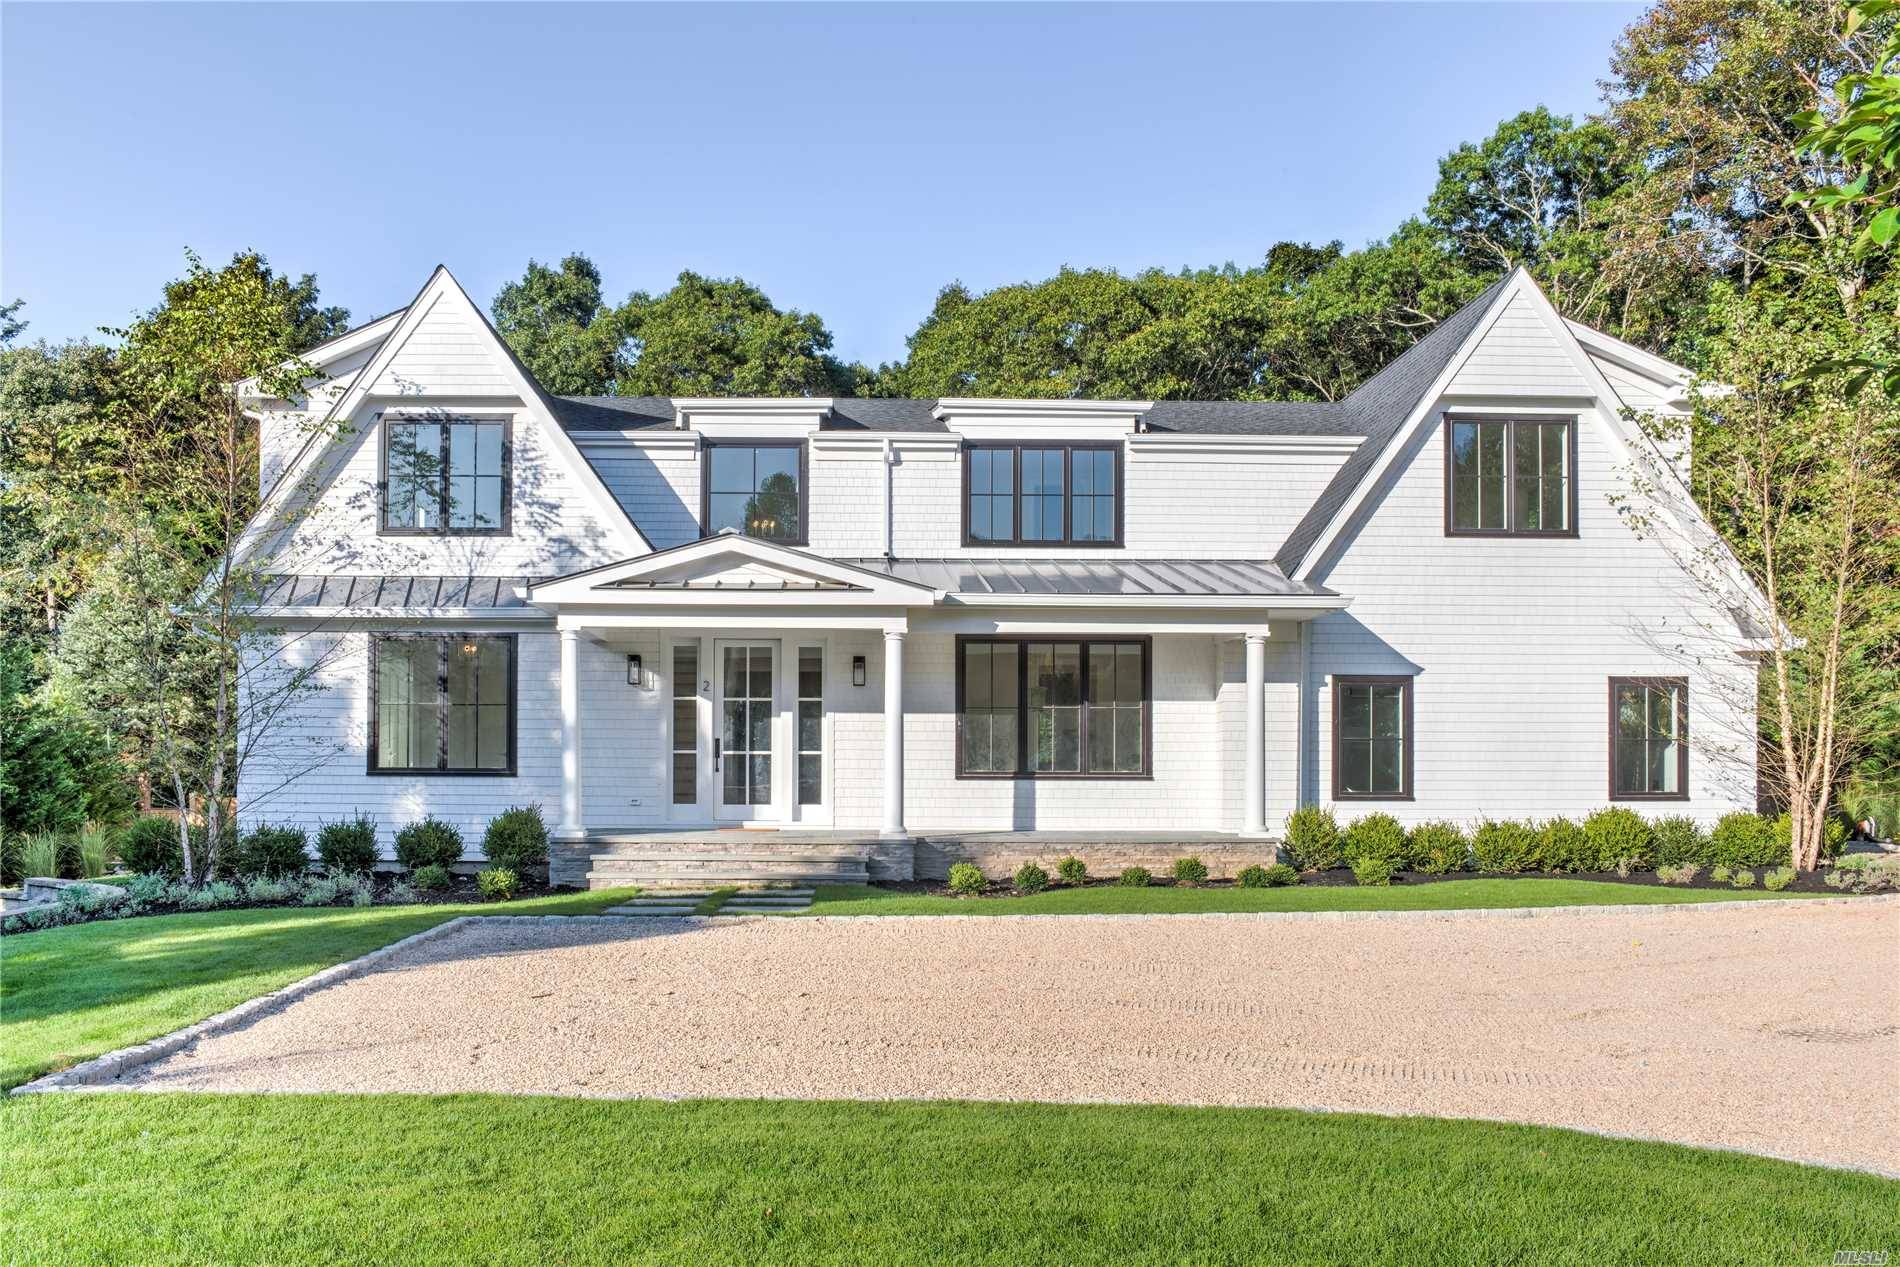 New Construction Sag Harbor New Luxury Residence In Rawson Estates Beachfront Community On Little Peconic Bay L Curto Building Company L New Transitional Modern Home L 4, 000Sf L 5 ...